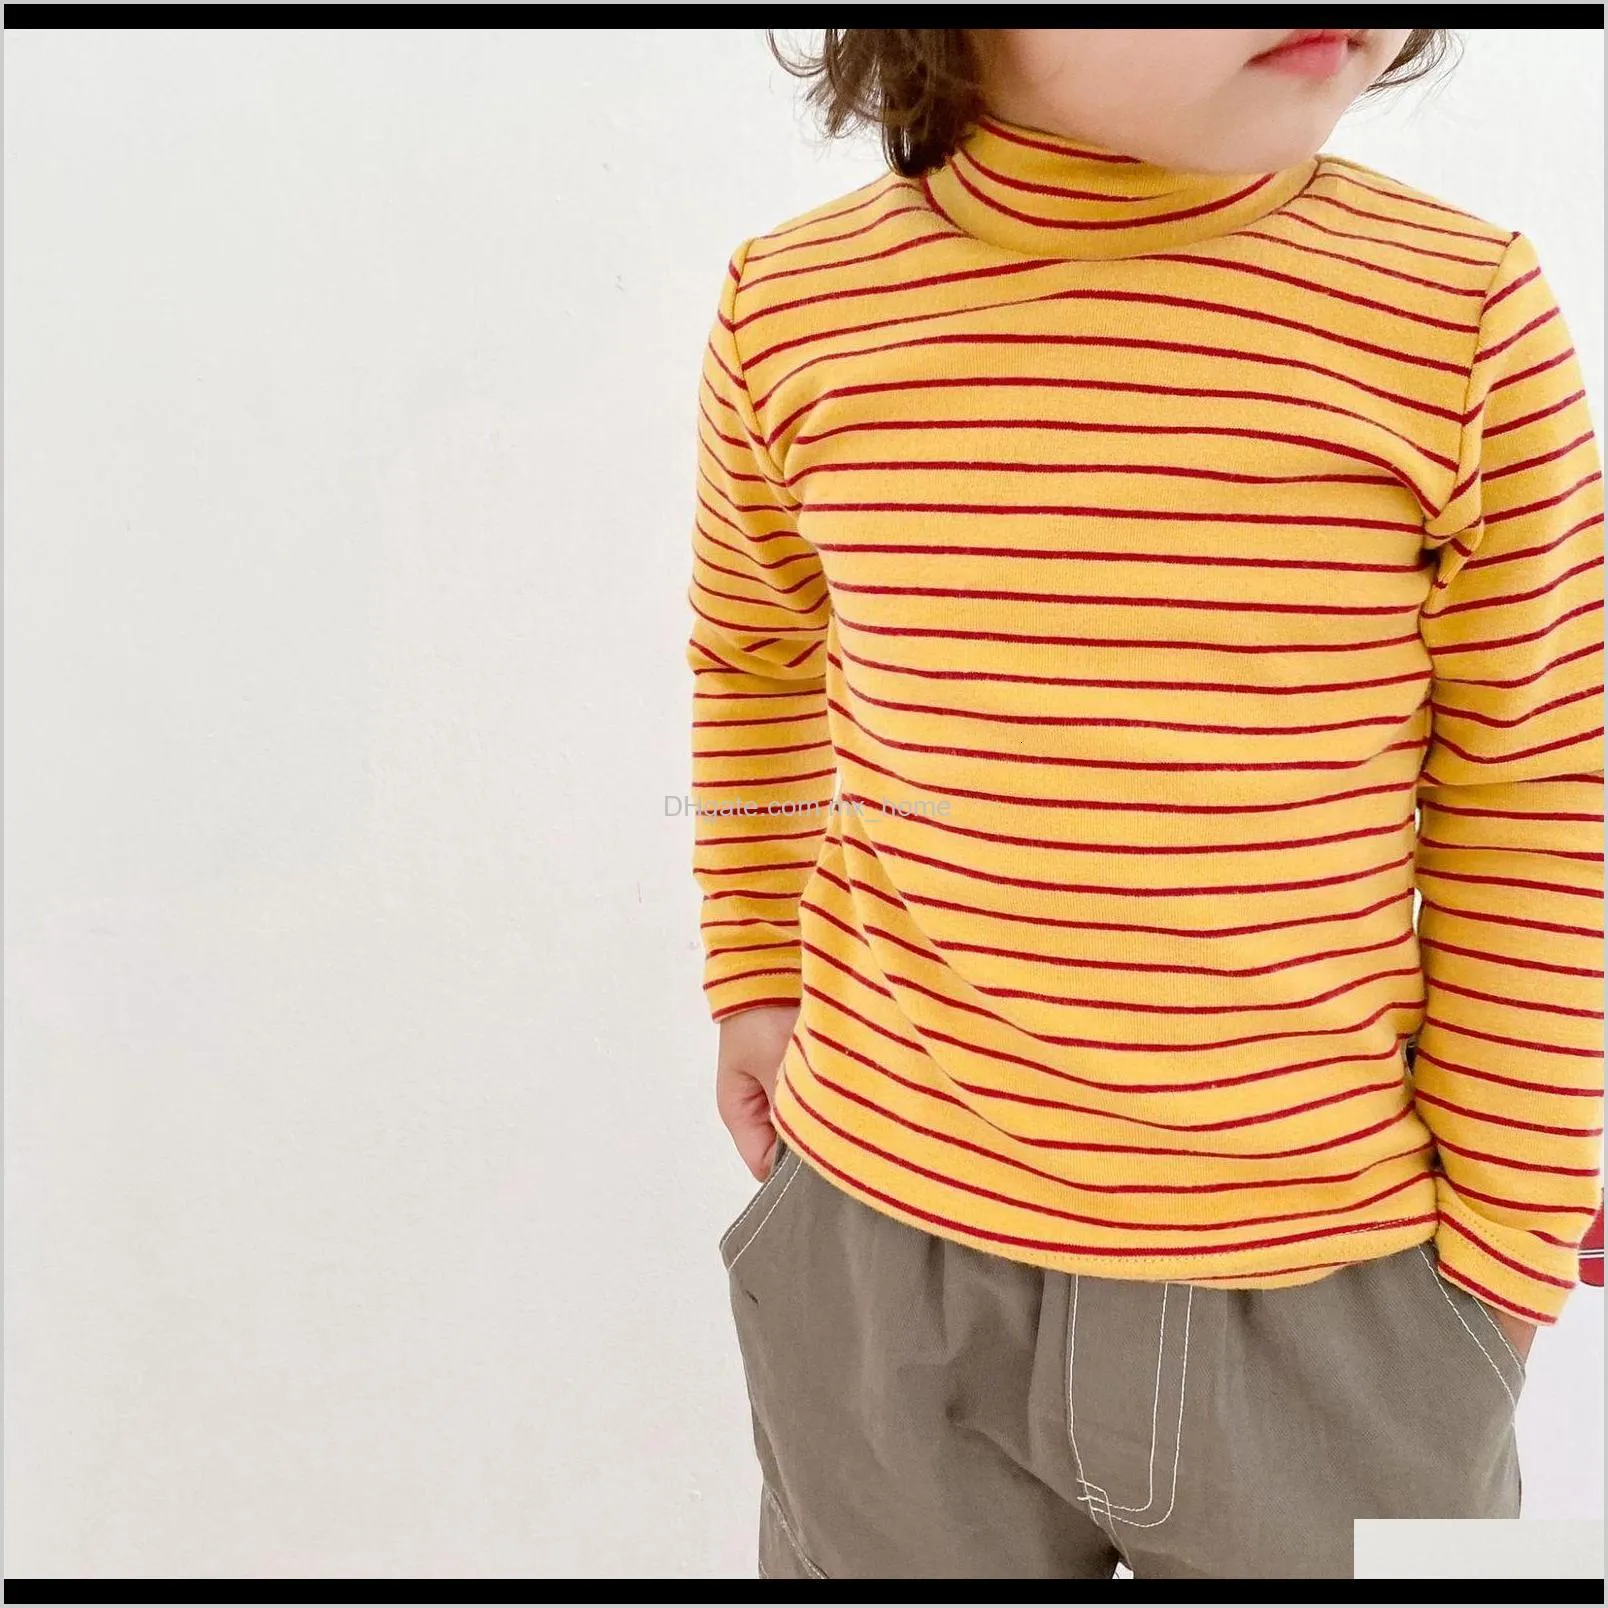 2021 kids t-shirt cotton baby boys stripe t-shirts 2-6 years children clothing toddler girl long sleeve tops tees casual pullover new